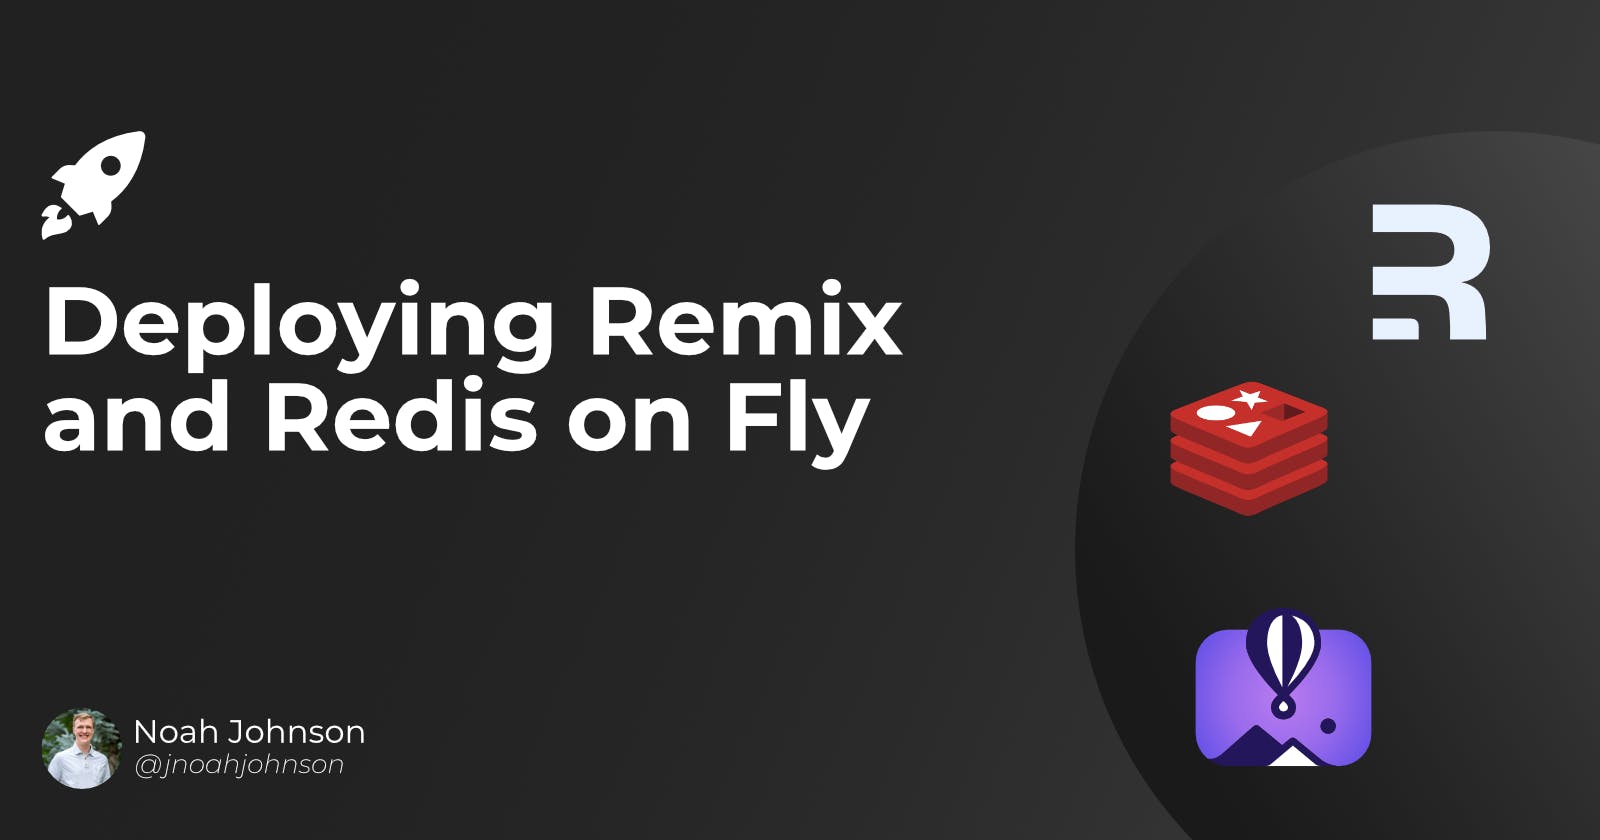 Deploying Remix and Redis on Fly